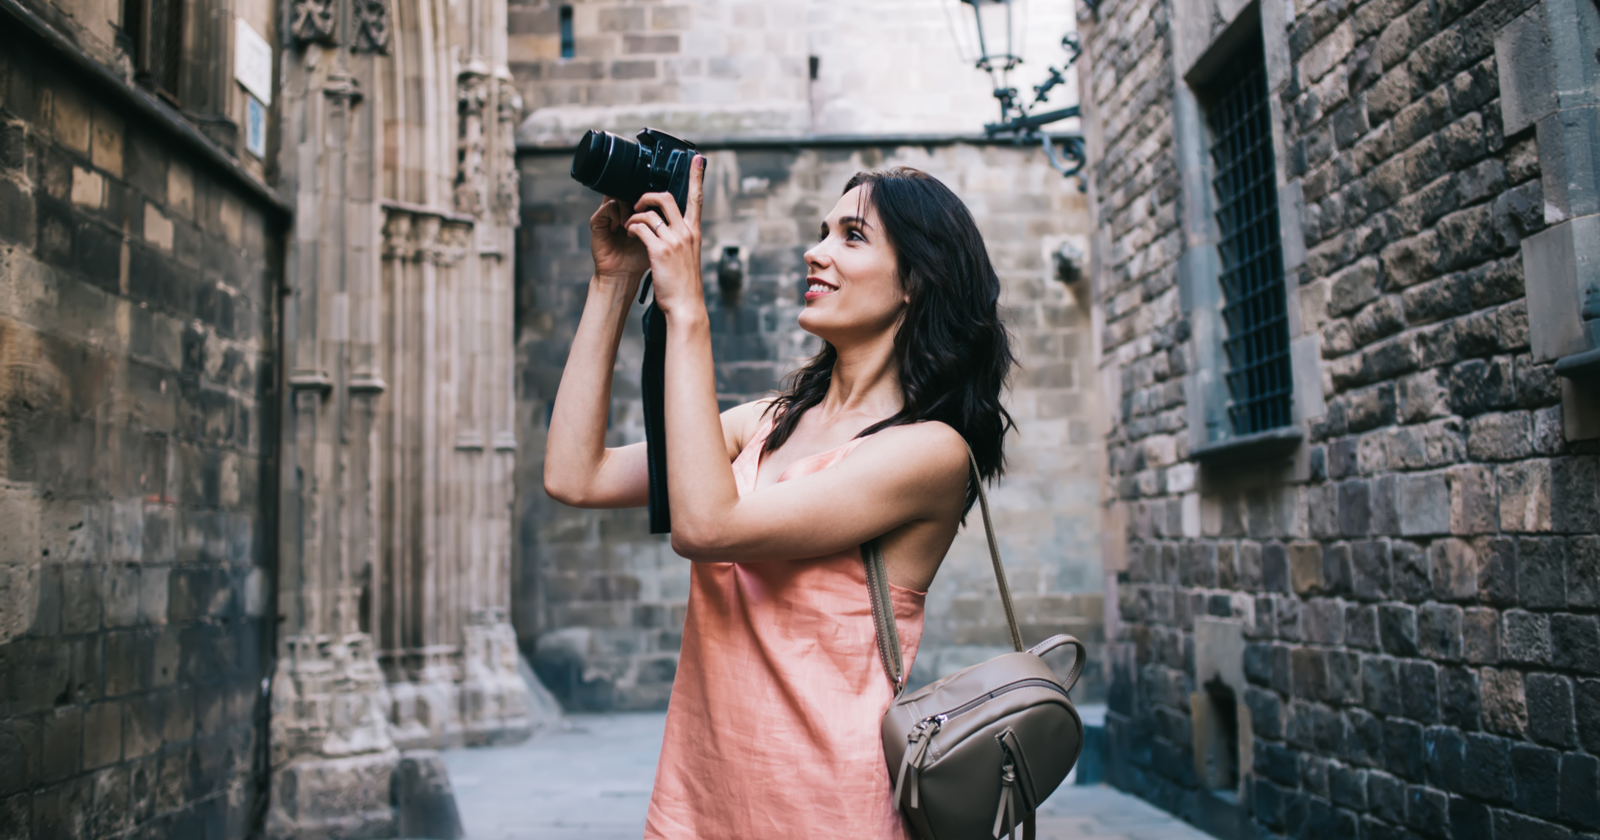 5 Tips For More Engaging & Impactful Branded Travel Content via @sejournal, @seo_travel